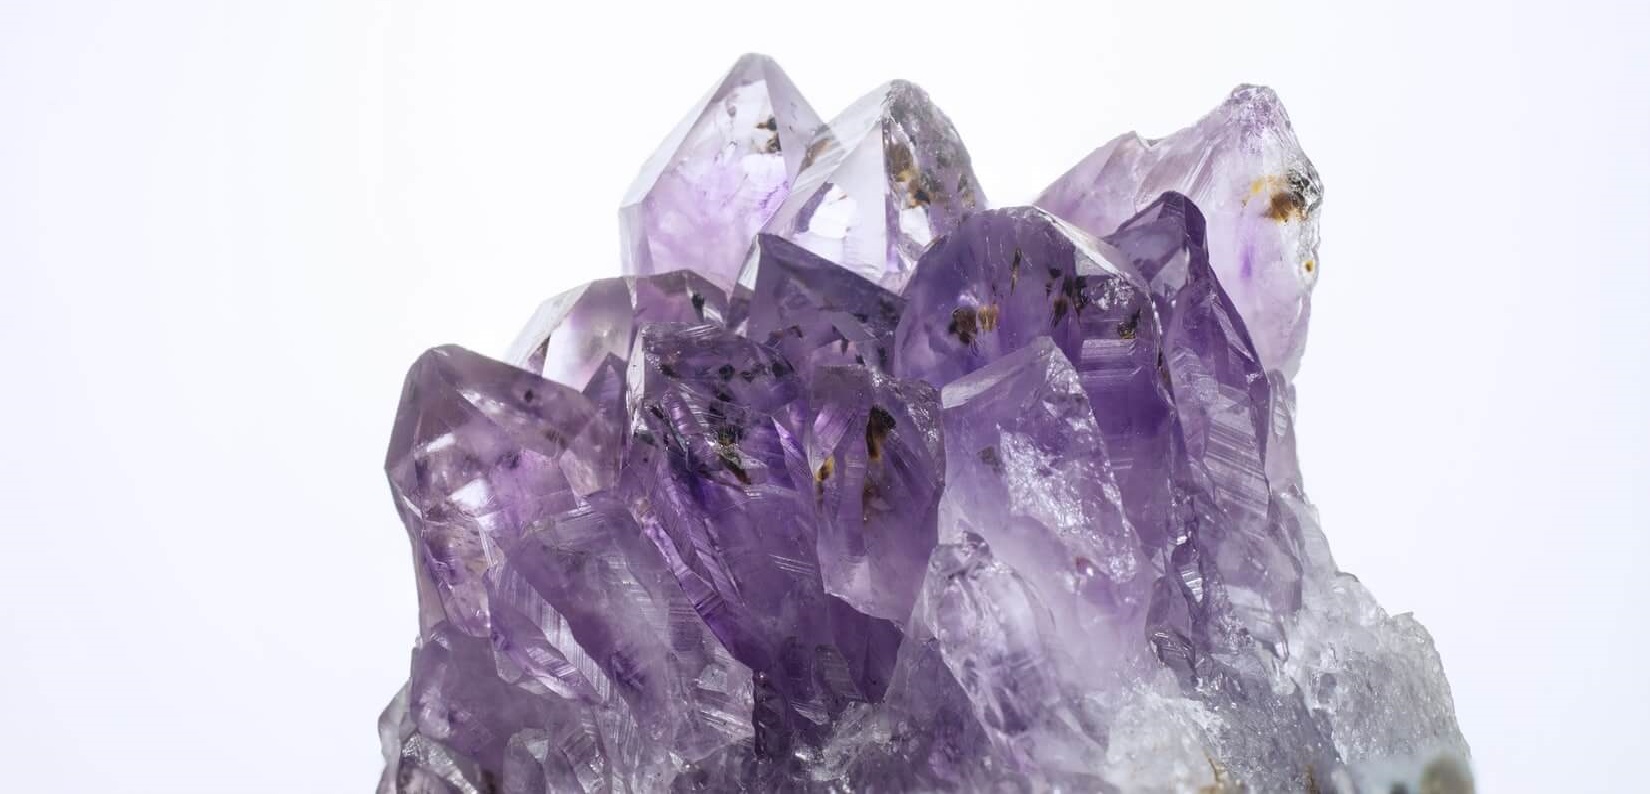 Amethyst Meanings, Properties, and Uses